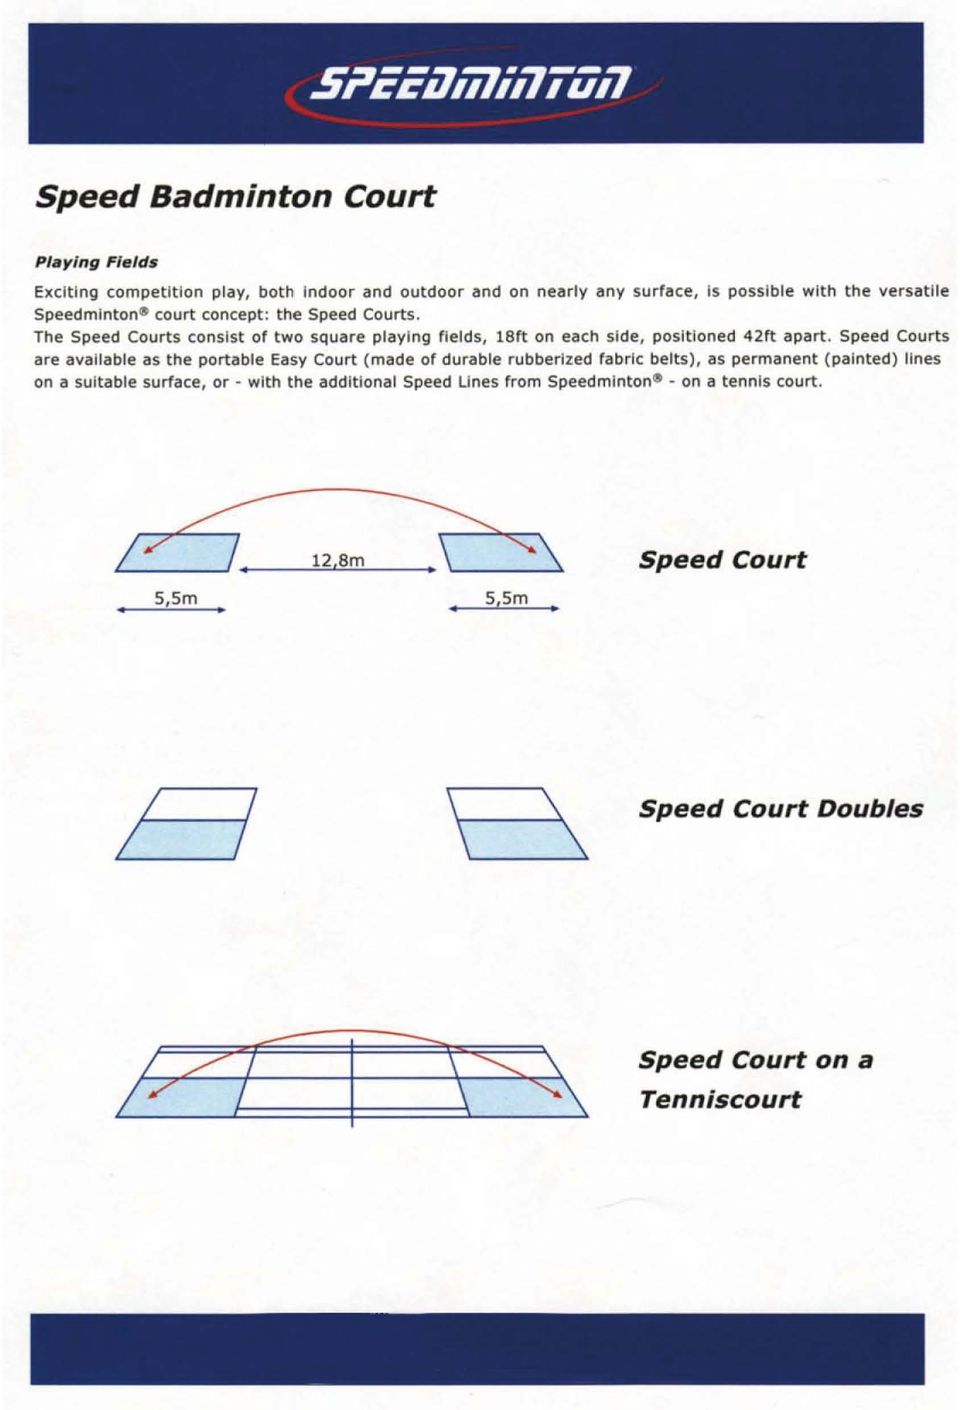 Speed Courts are avallable as the portable Easy Court (made of durable rubberlzed fabrlc belts), as permanent (palnted) IInes on a sultable surface,